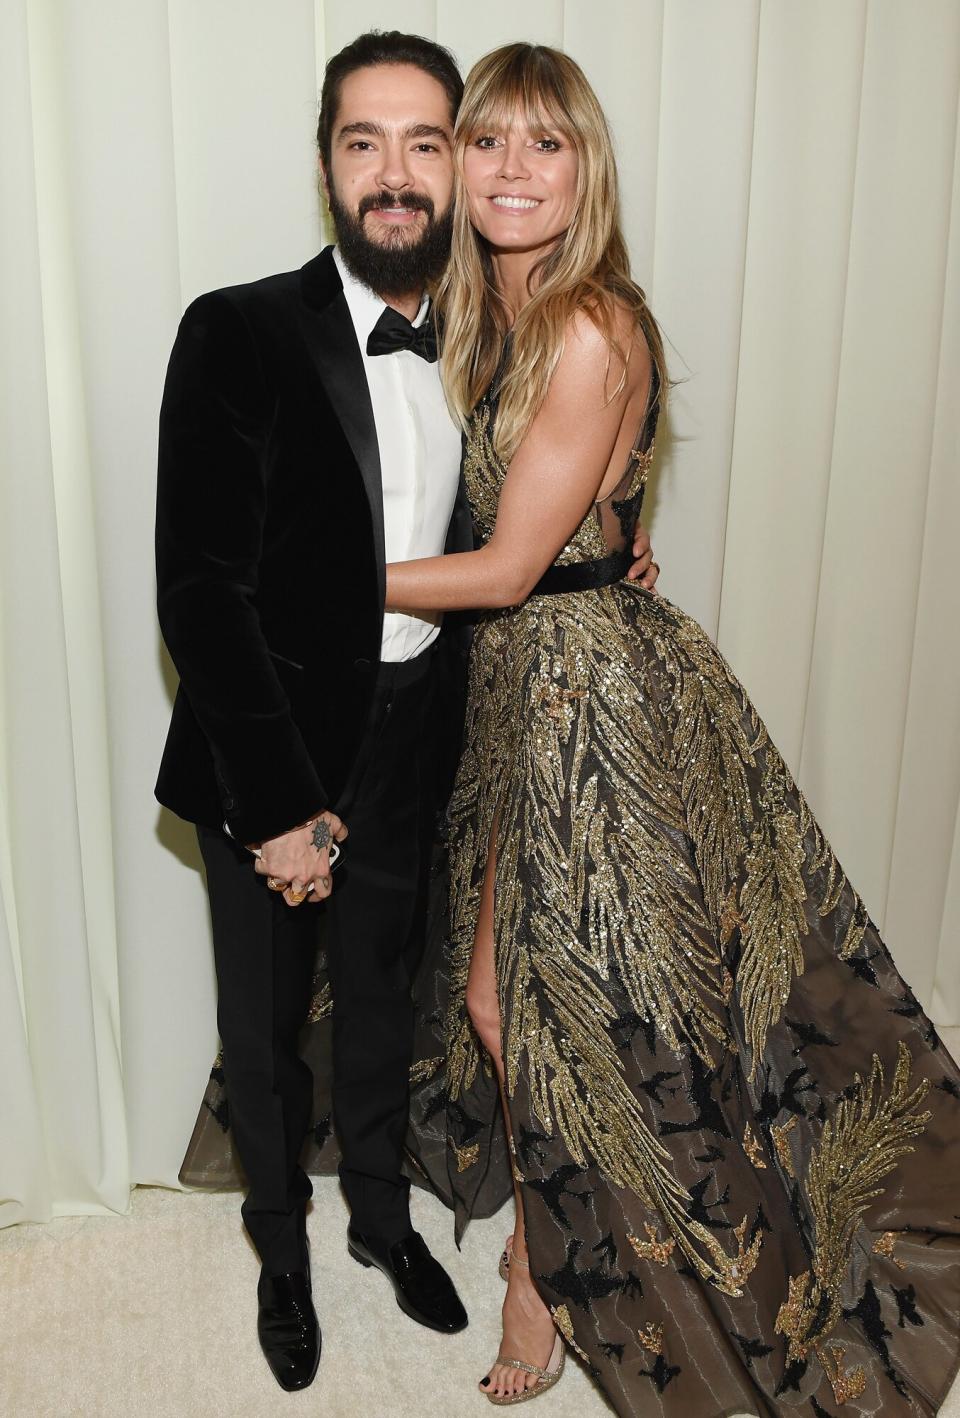 Tom Kaulitz and Heidi Klum attend the 27th annual Elton John AIDS Foundation Academy Awards Viewing Party sponsored by IMDb and Neuro Drinks celebrating EJAF and the 91st Academy Awards on February 24, 2019 in West Hollywood, California